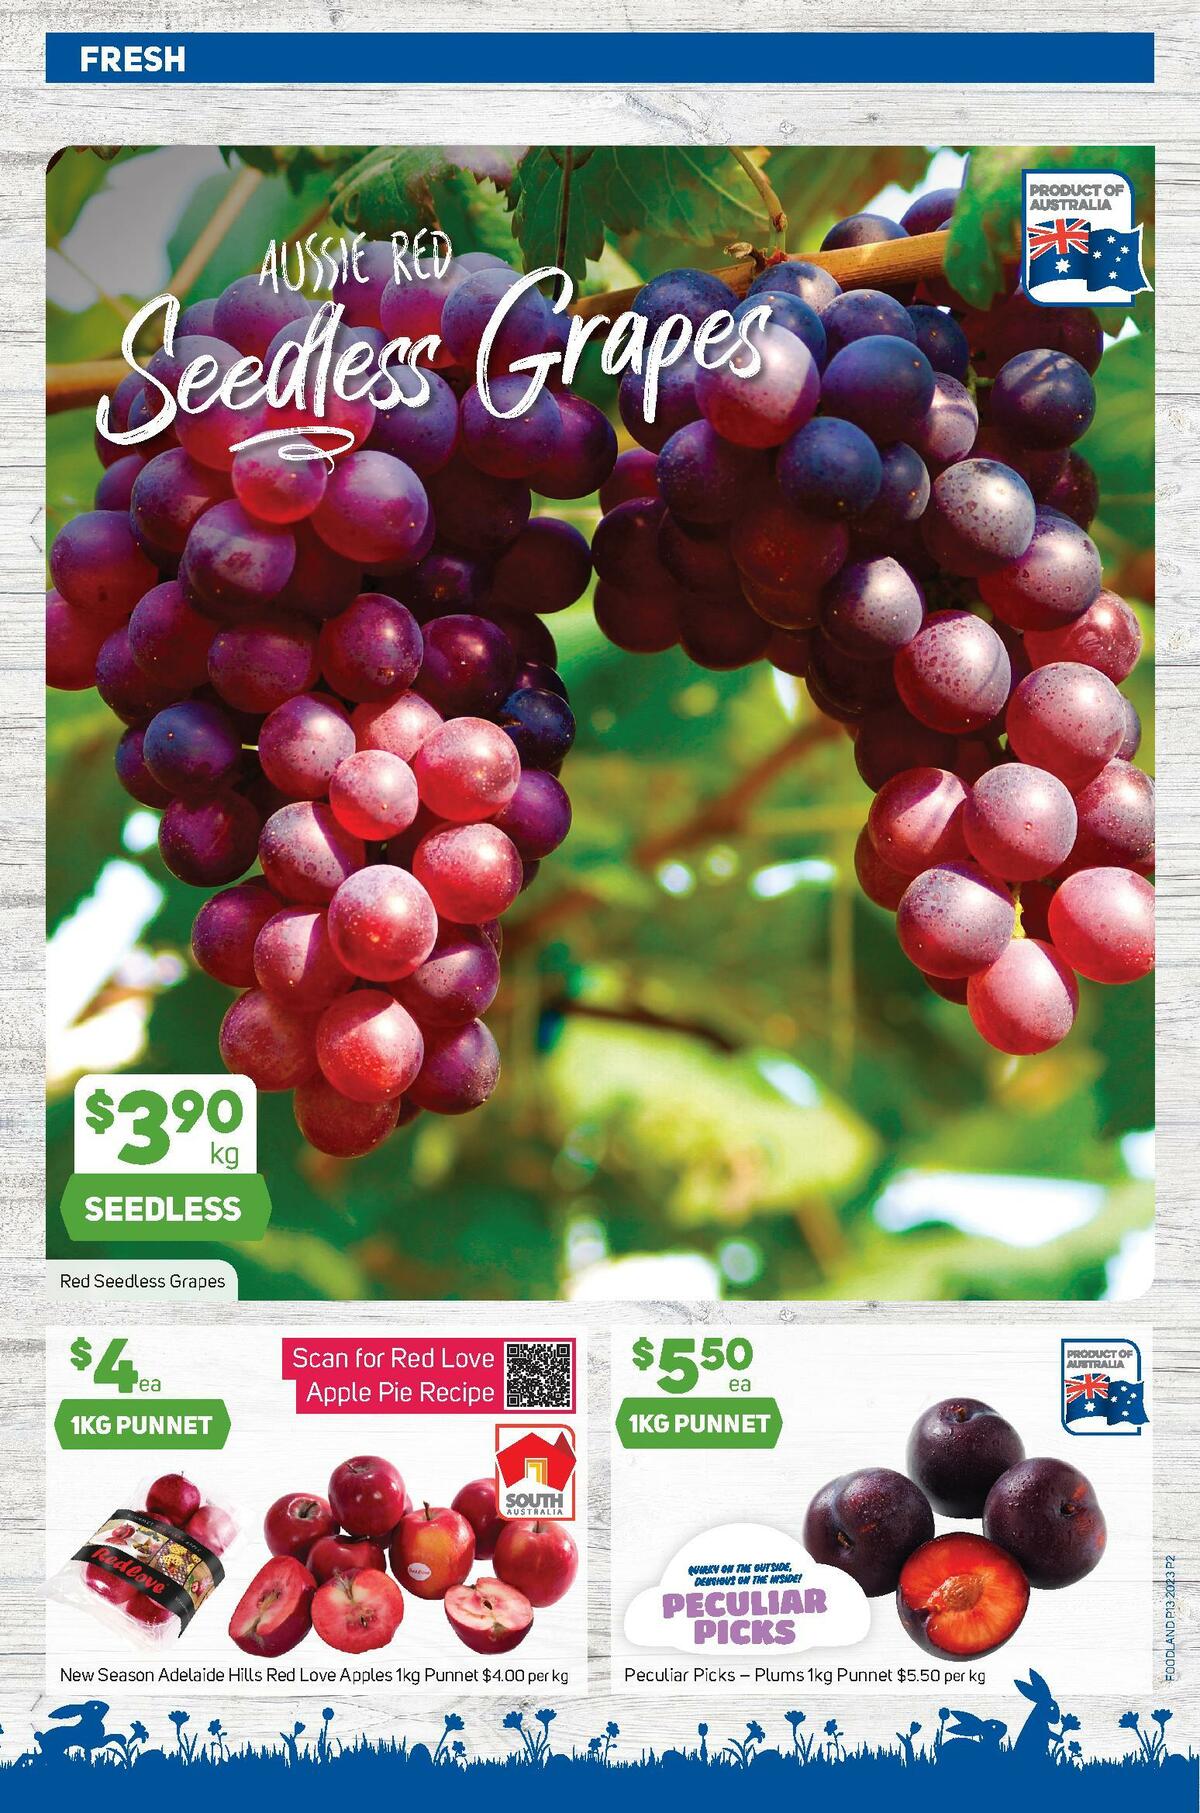 Foodland Catalogues from 29 March